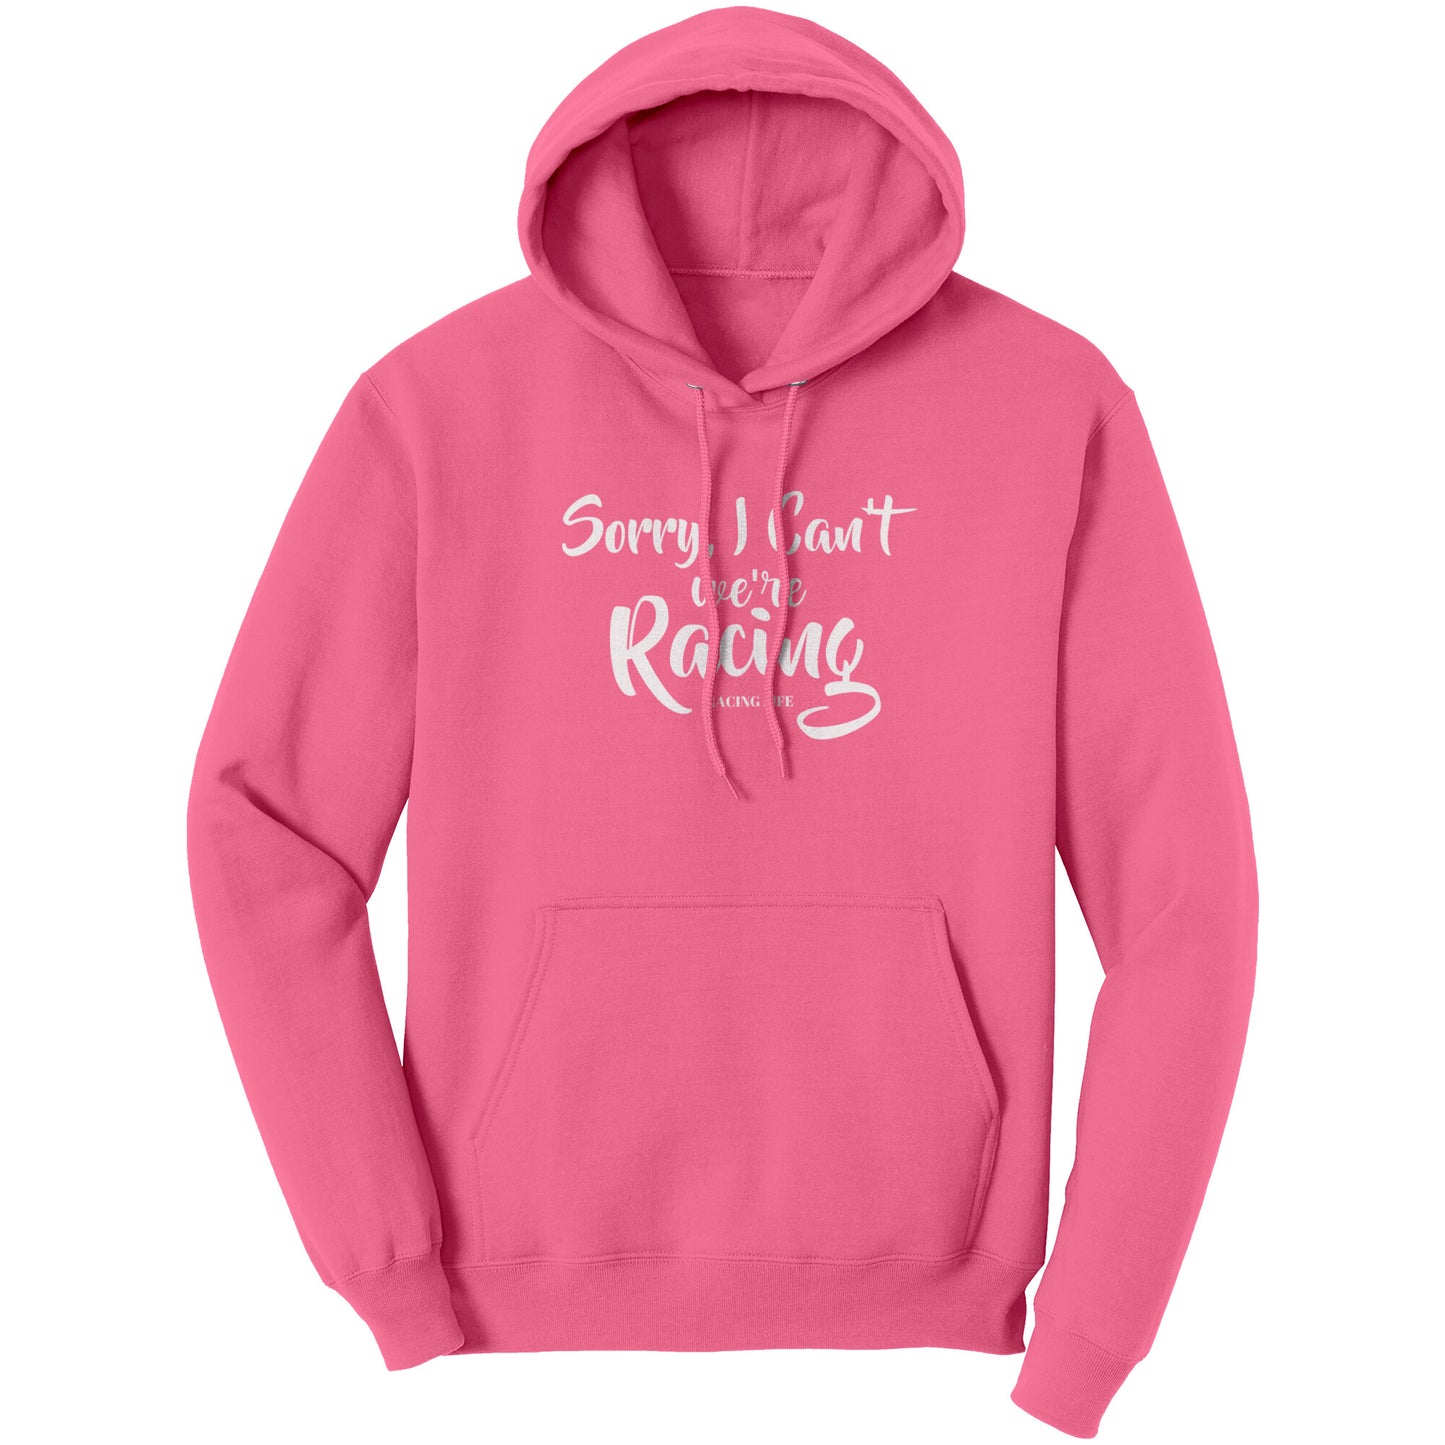 Sorry I Can't We're Racing Women's Hoodie